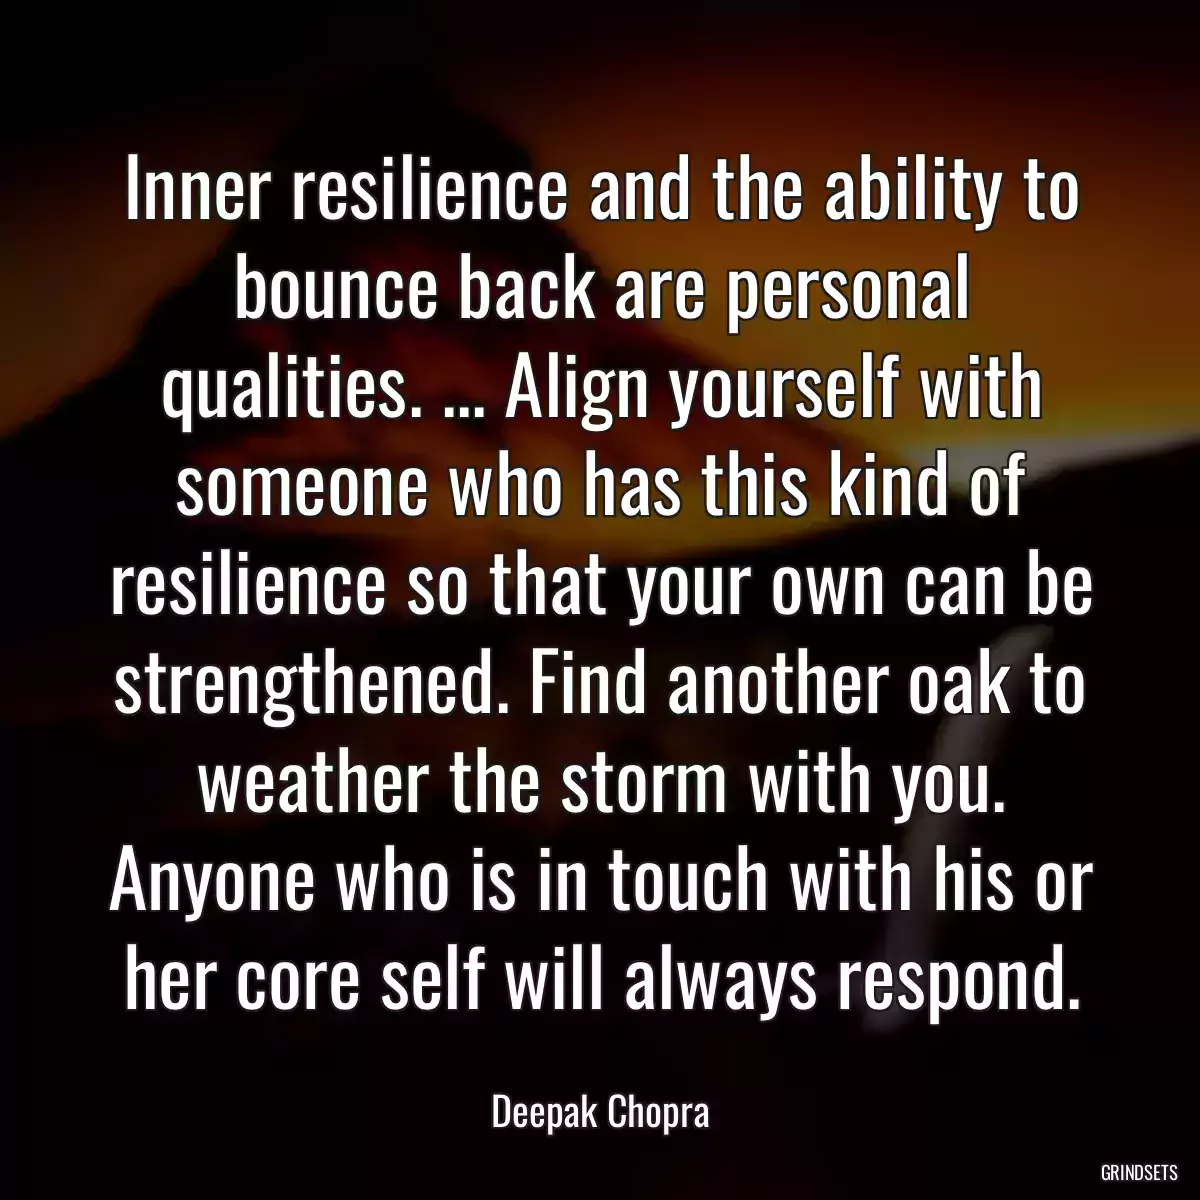 Inner resilience and the ability to bounce back are personal qualities. ... Align yourself with someone who has this kind of resilience so that your own can be strengthened. Find another oak to weather the storm with you. Anyone who is in touch with his or her core self will always respond.